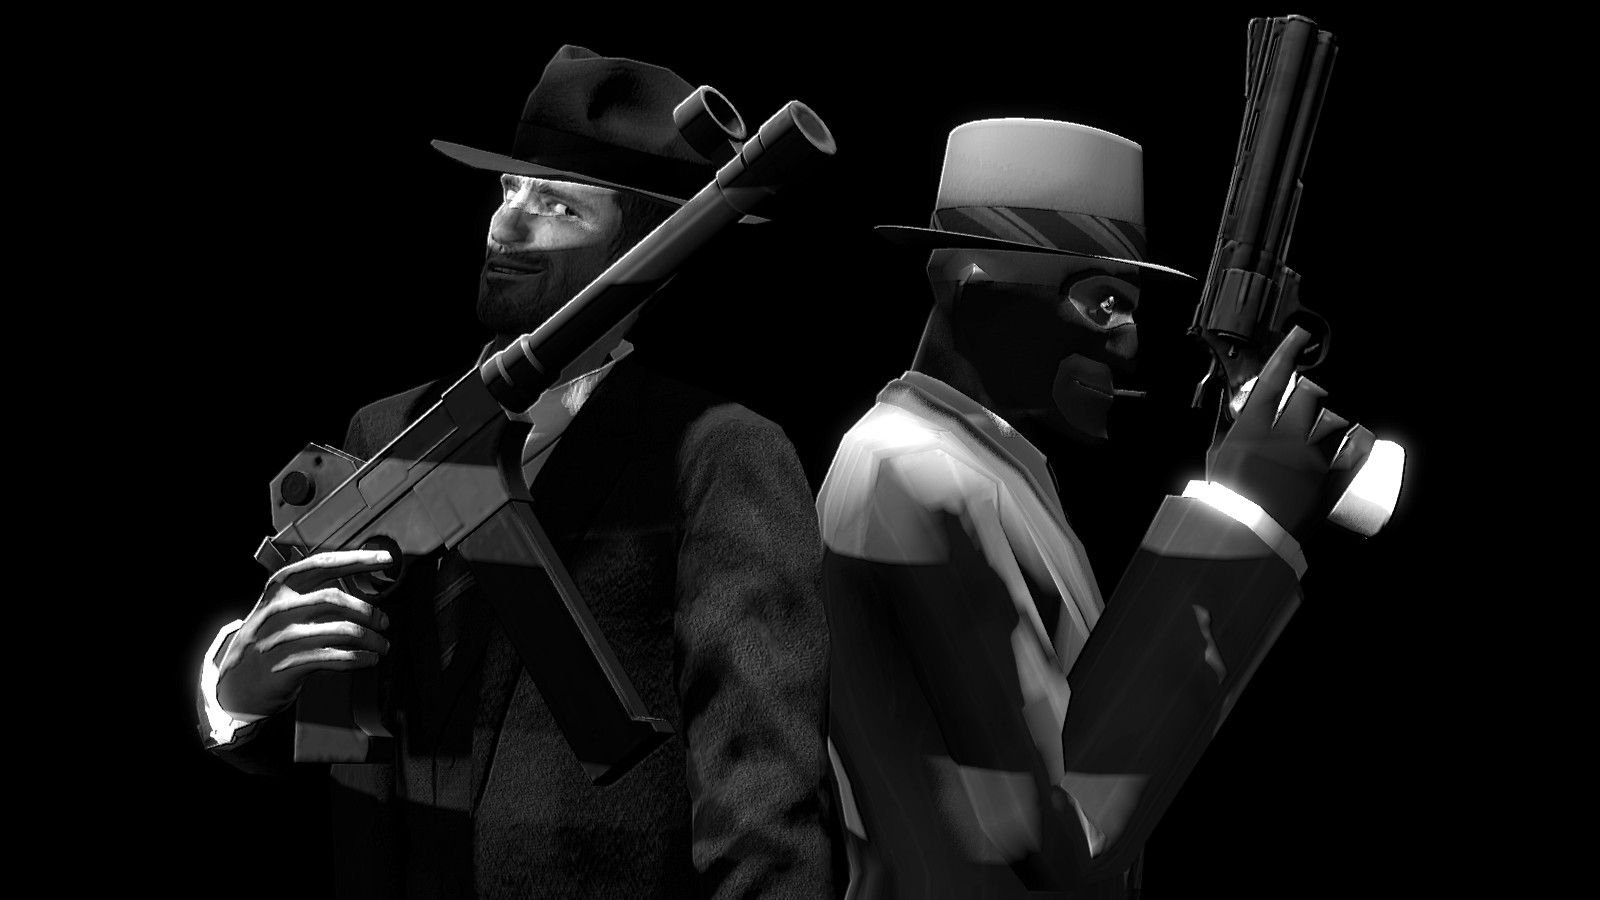 Mobsters By Robogineer